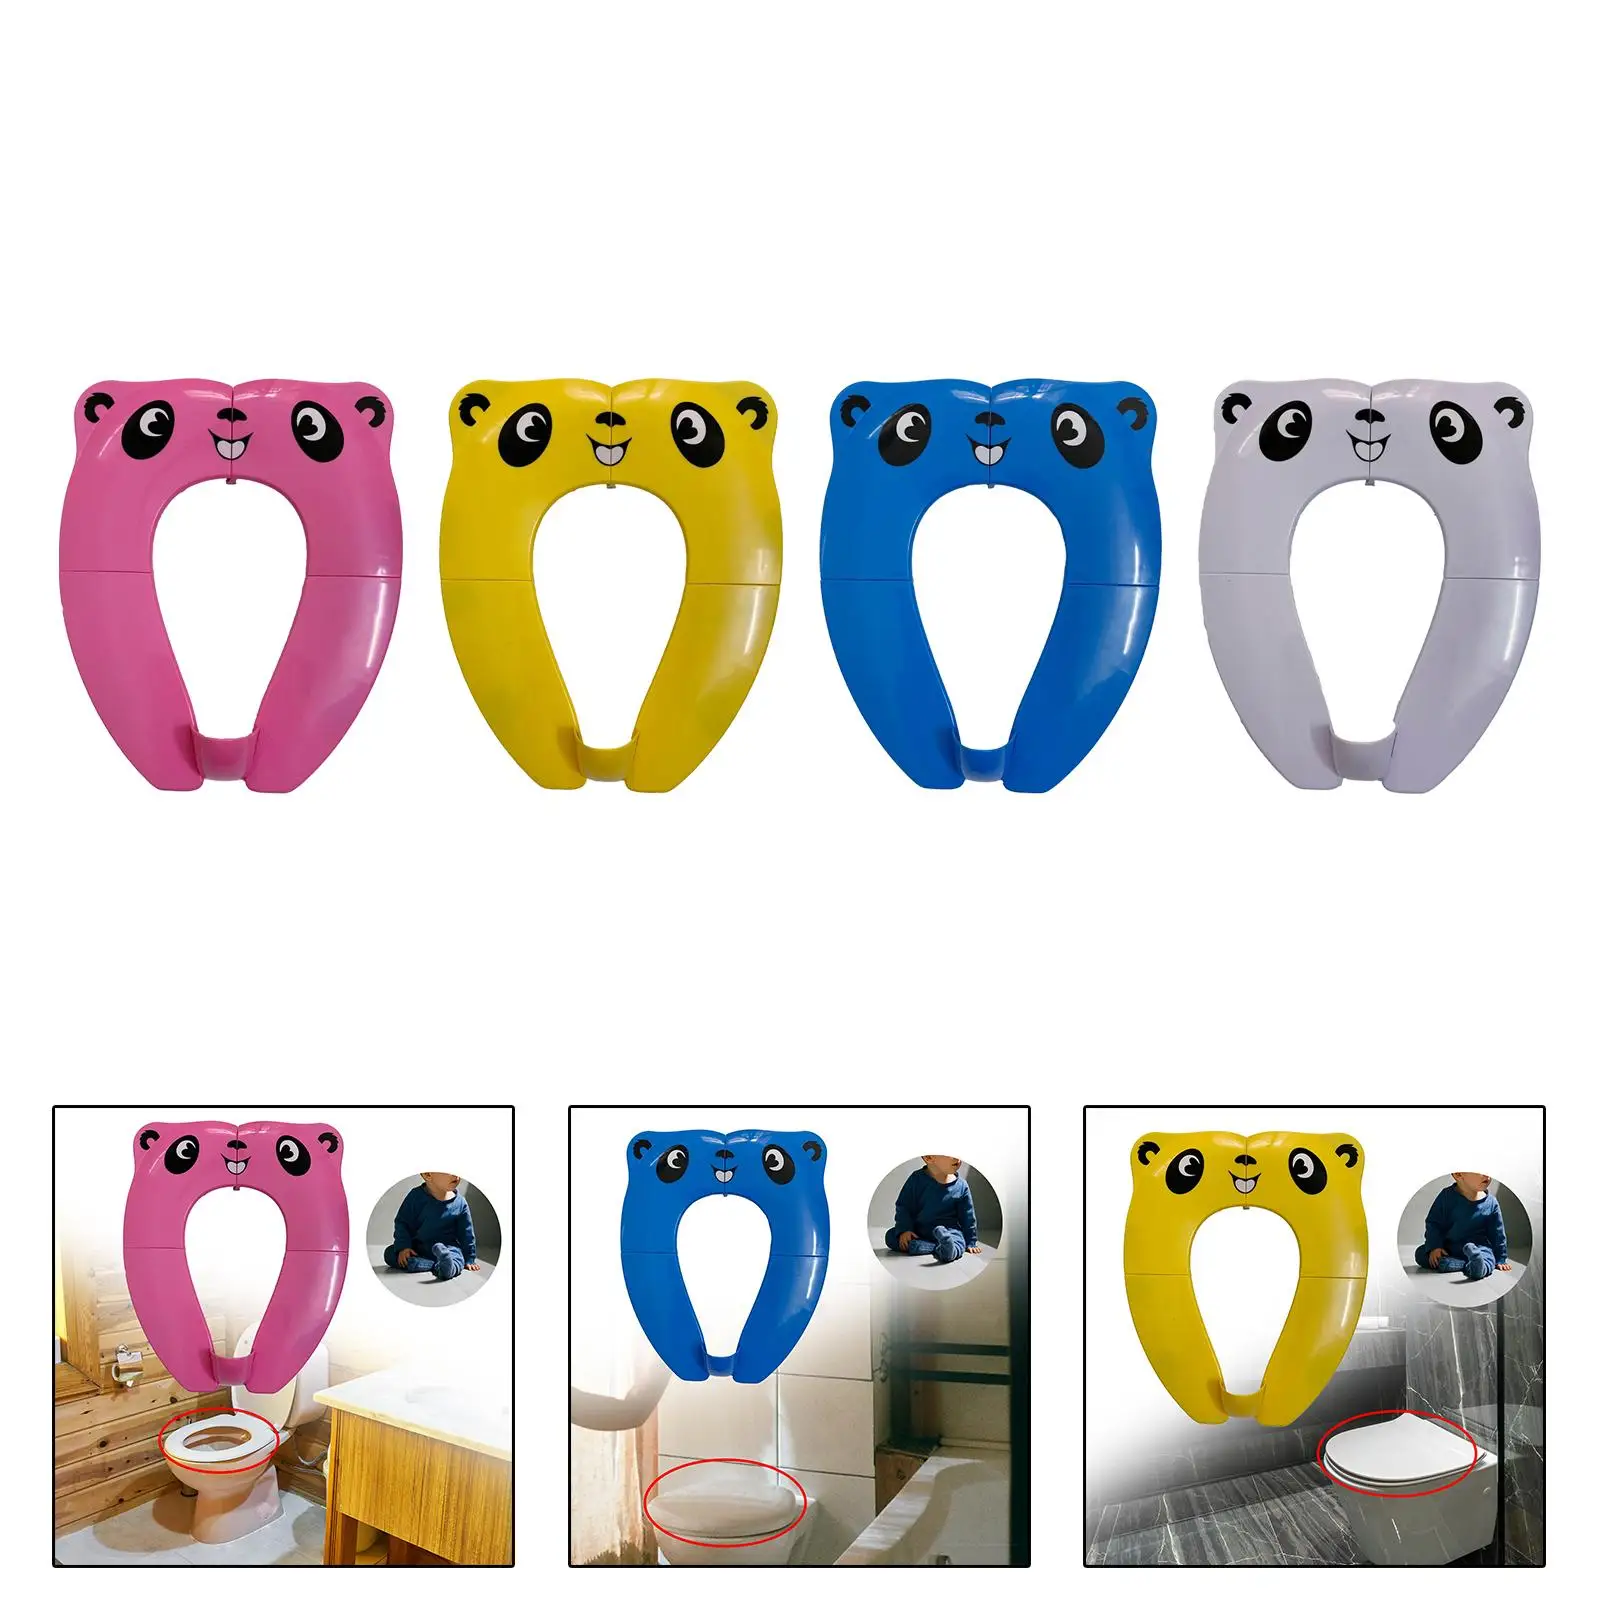 Folding Travel Potty Seat with Splash Guard Non Slip Toilet Training Potty Seat Cover for Girls